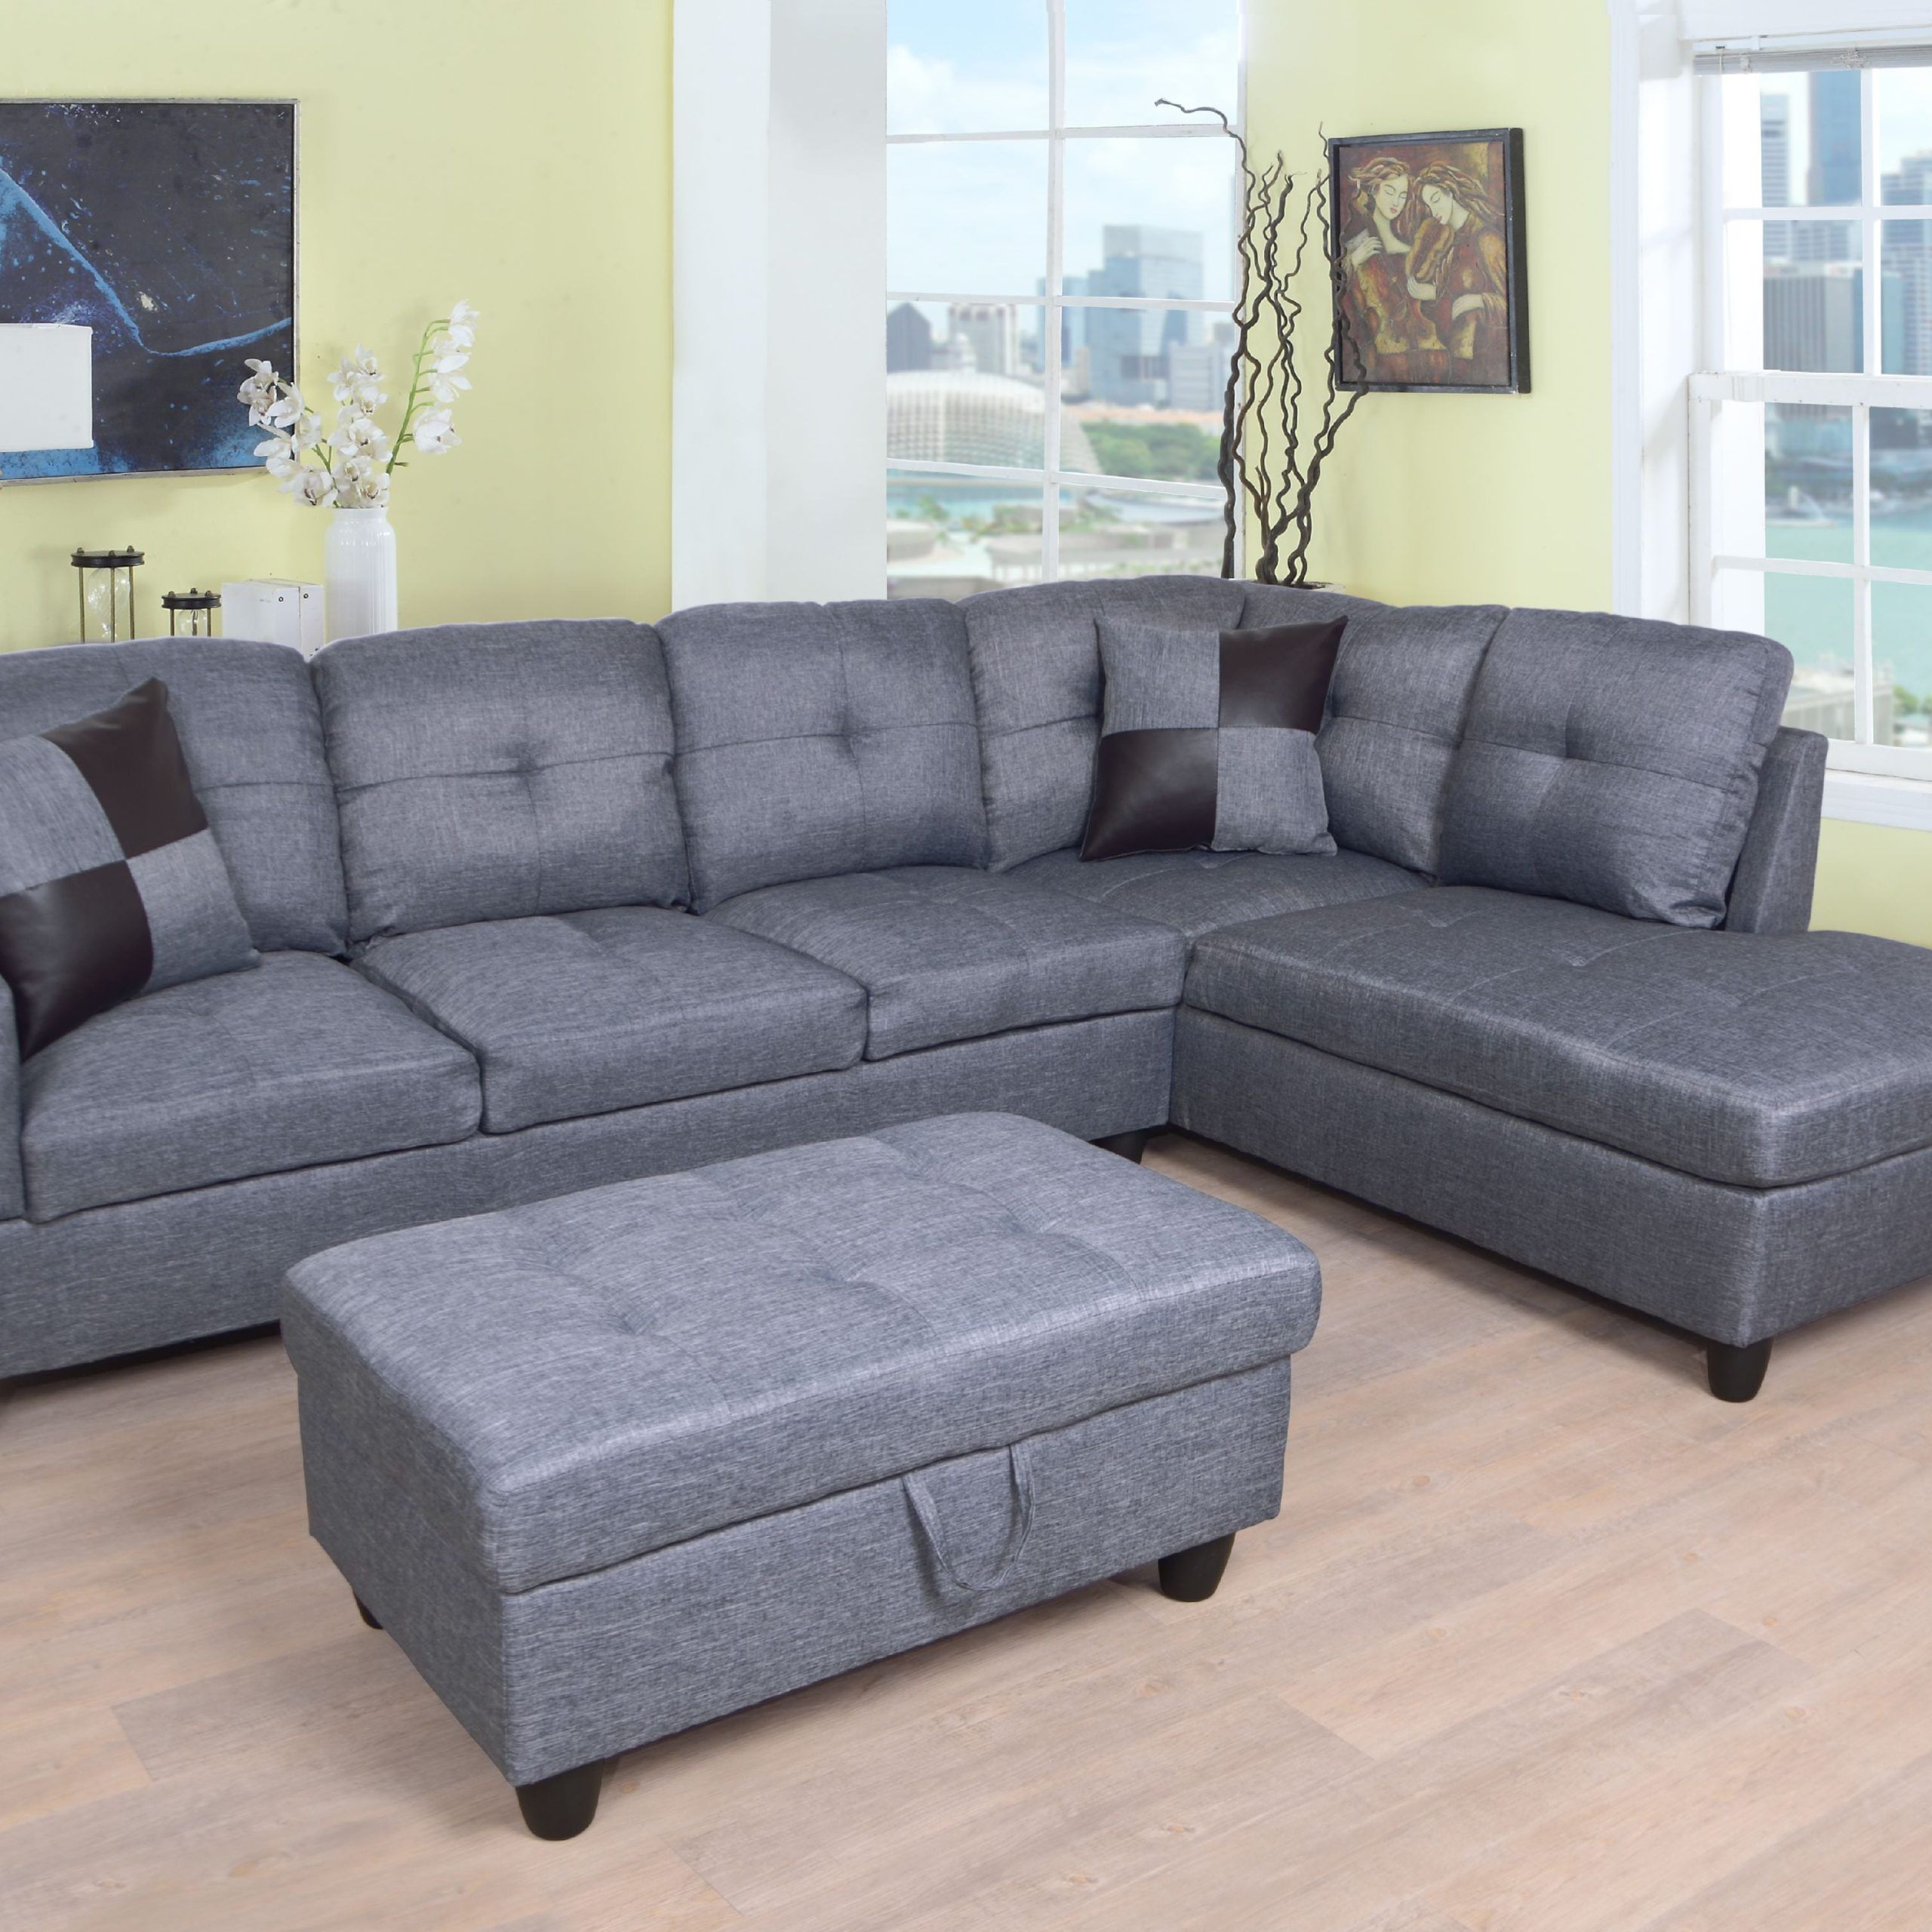 Sam Left Facing Sectional Sofa With Ottoman, Grey – Walmart With Sofas With Ottomans (View 6 of 20)